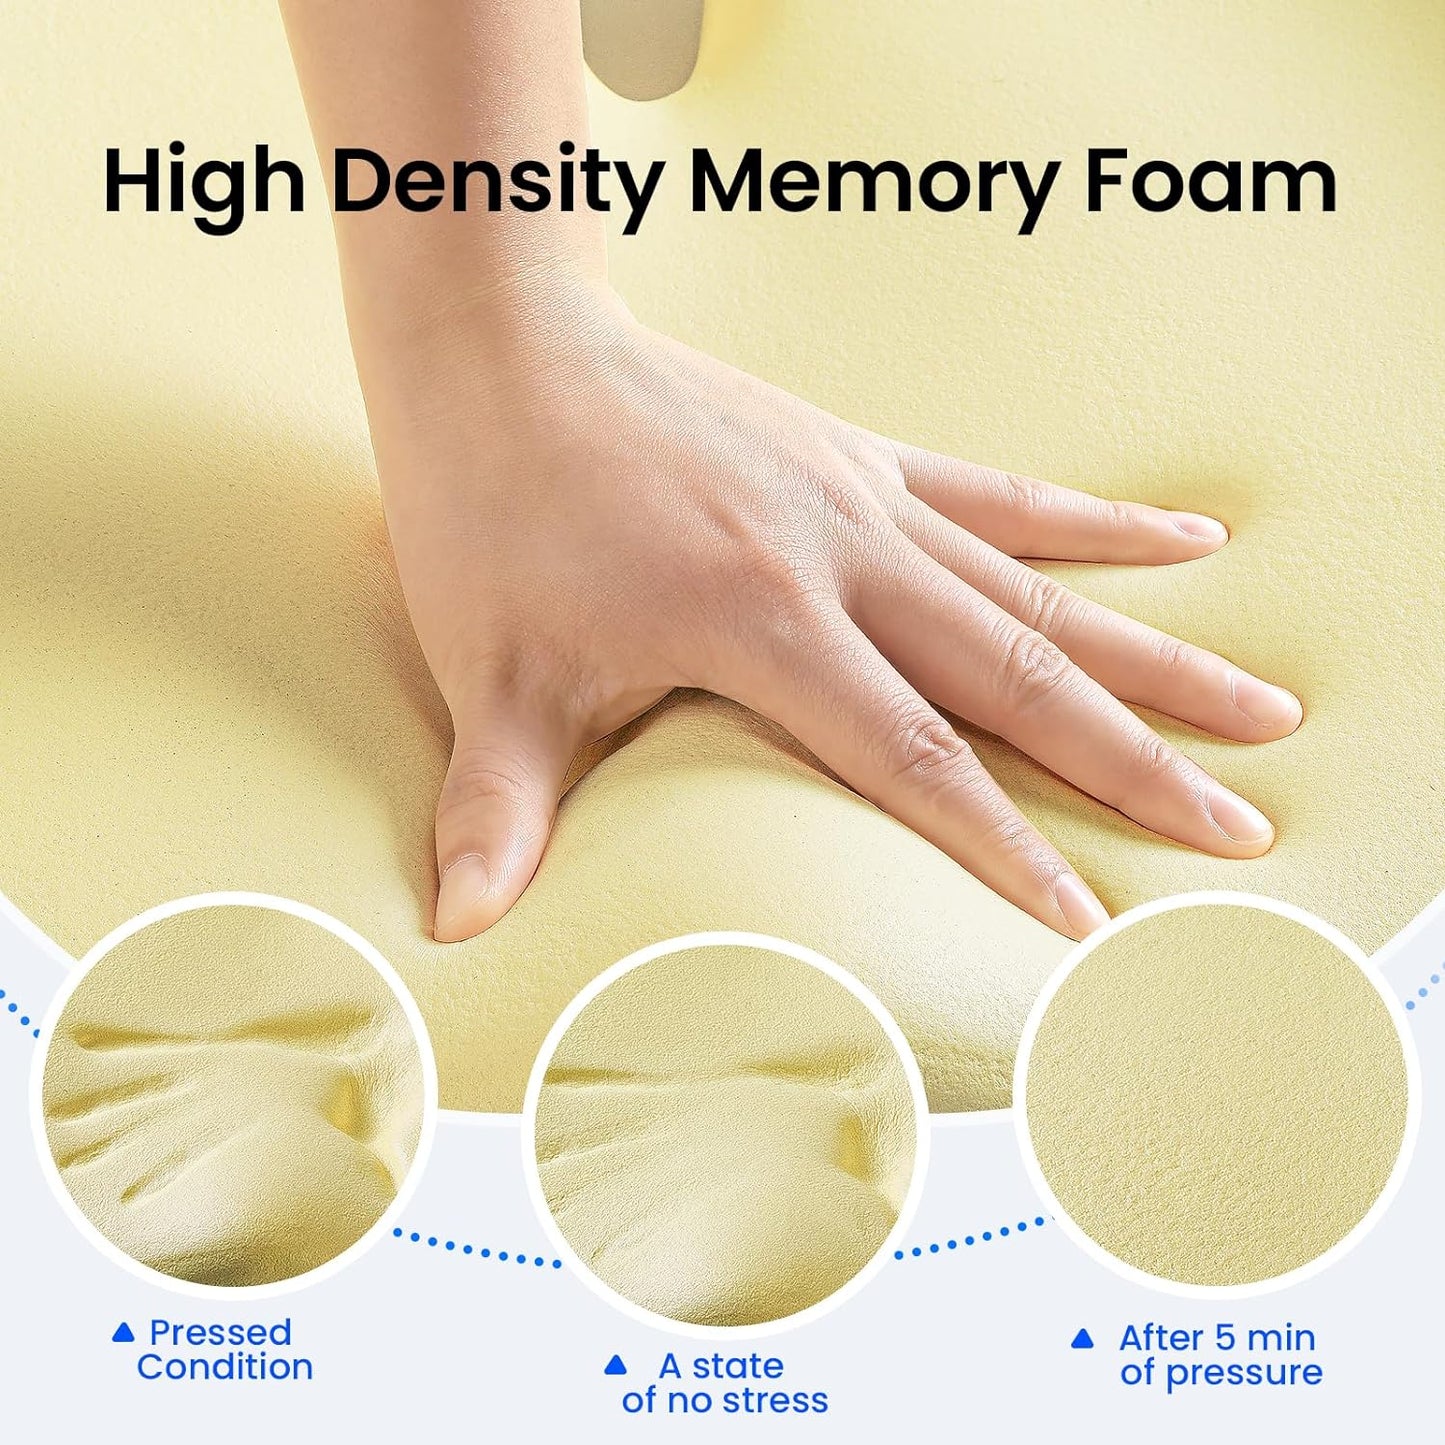 Large Seat Cushion for Office Chair Memory Foam Coccyx Pain Relief Cushion Pillow for Back Support Non-Slip Seat Pad for Office Desk, Car Seat, Wheelchair, Sciatica, Tailbone Pain